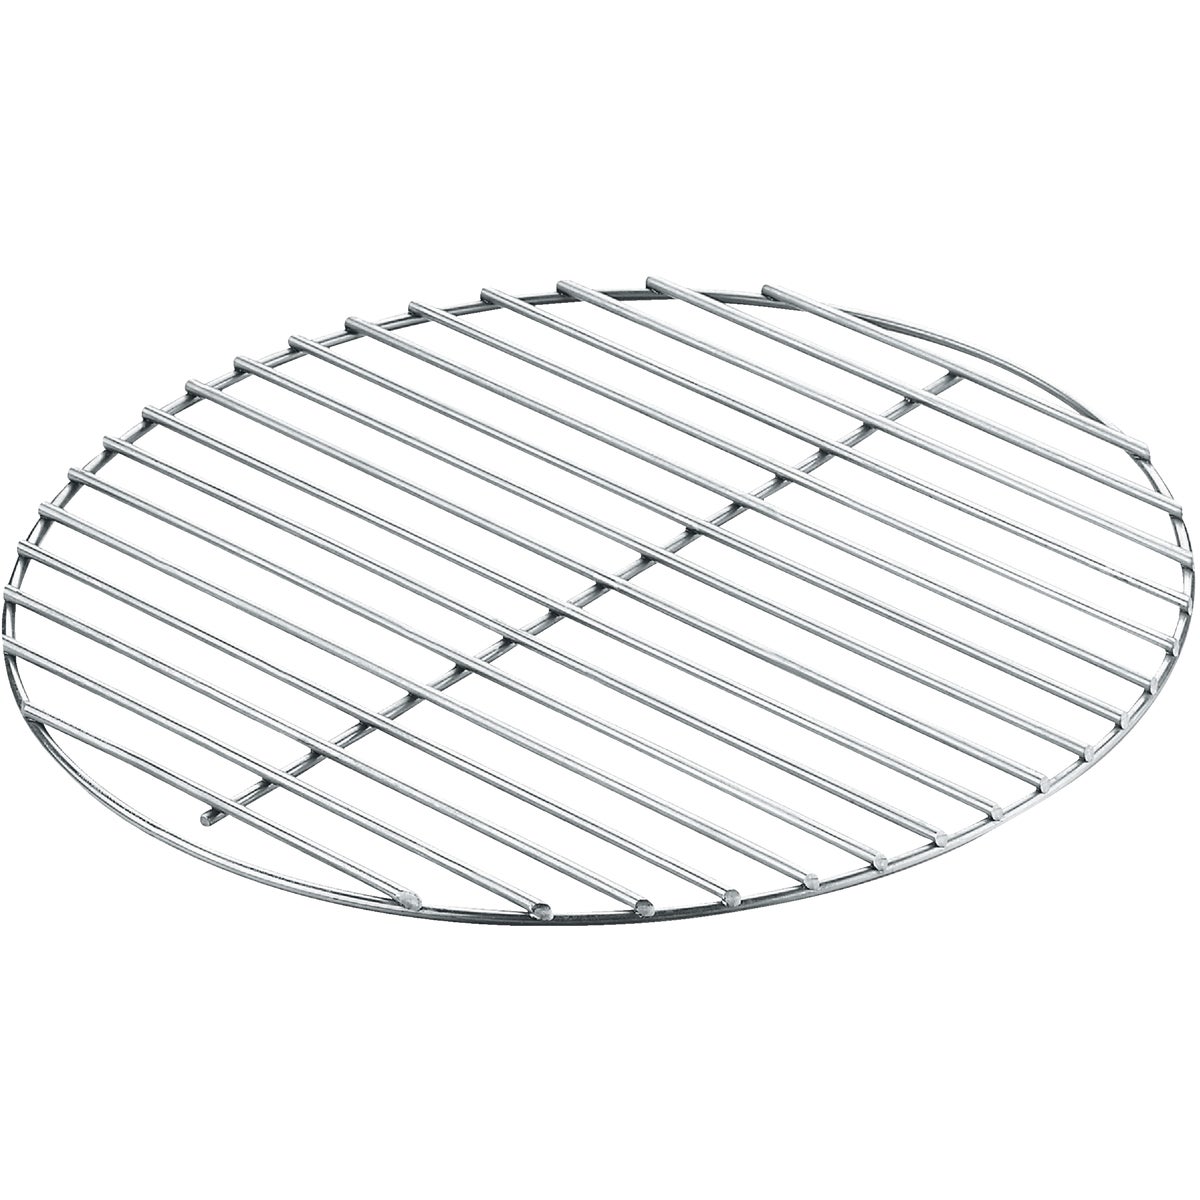 Item 808601, Heavy steel charcoal grate for kettle grills.